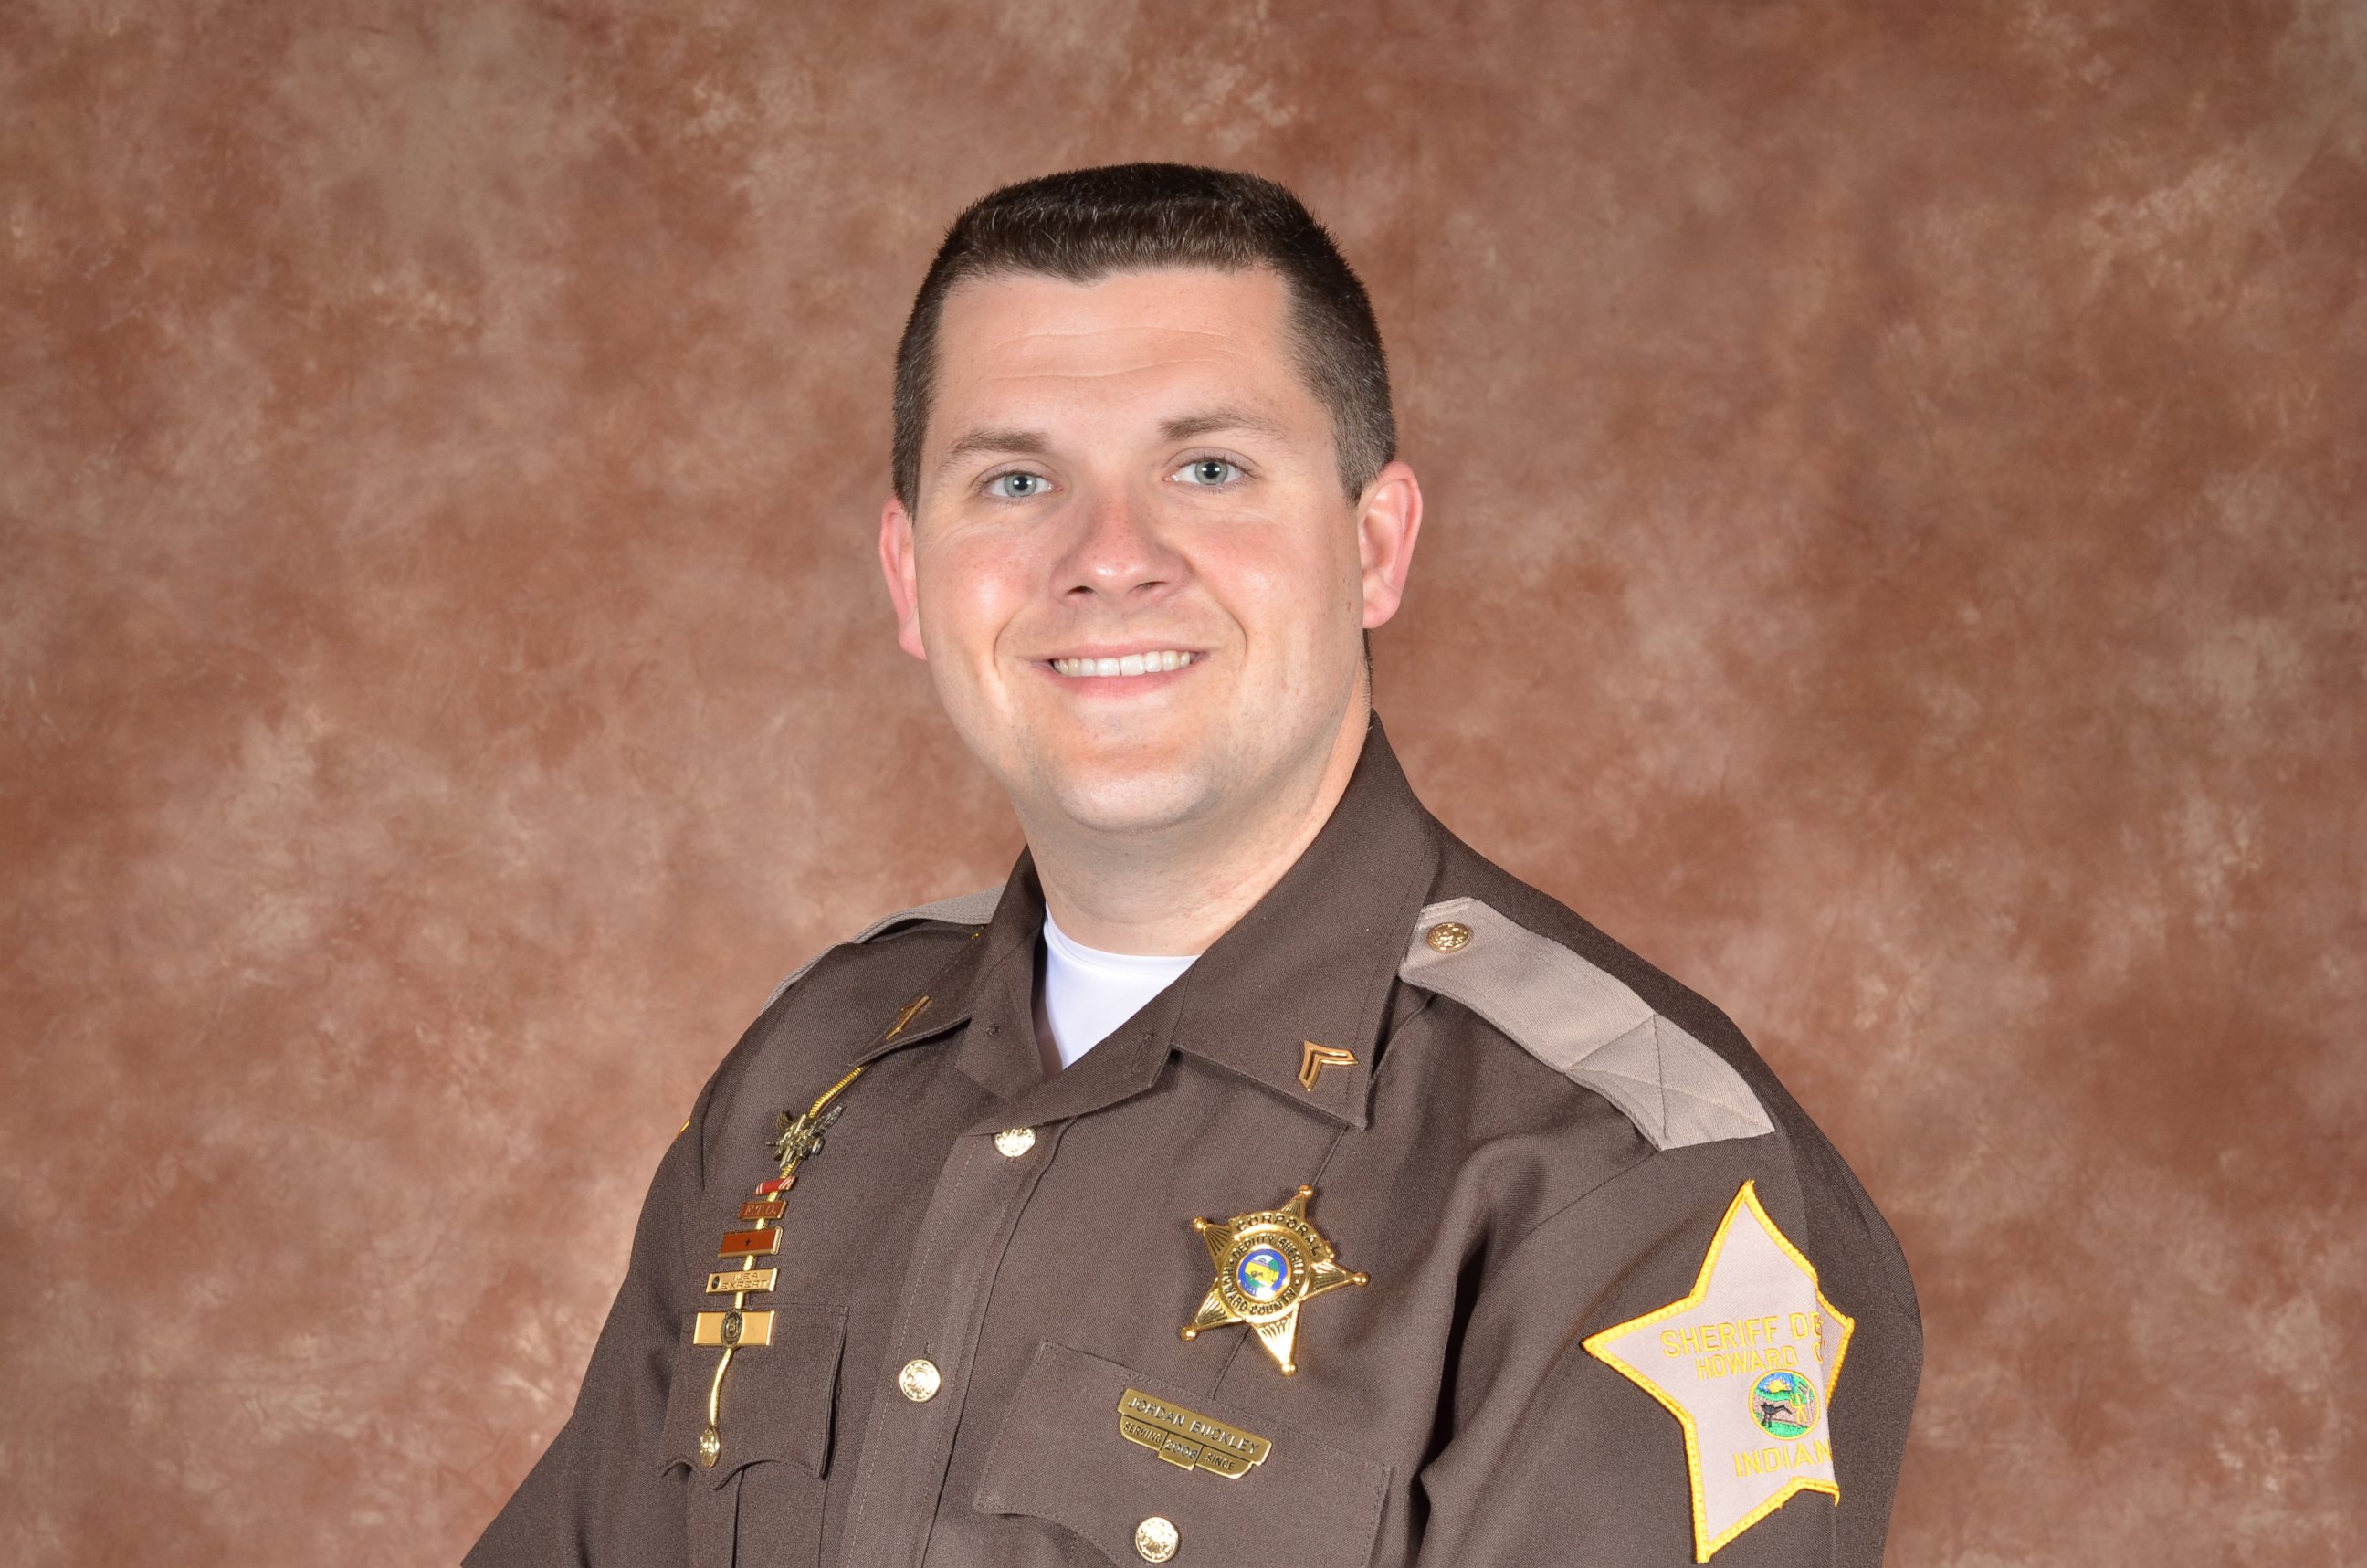 PHOTO: Howard County Sheriff Sergeant Jordan J. Buckley was injured after a shooting in Indiana March 20, 2016.